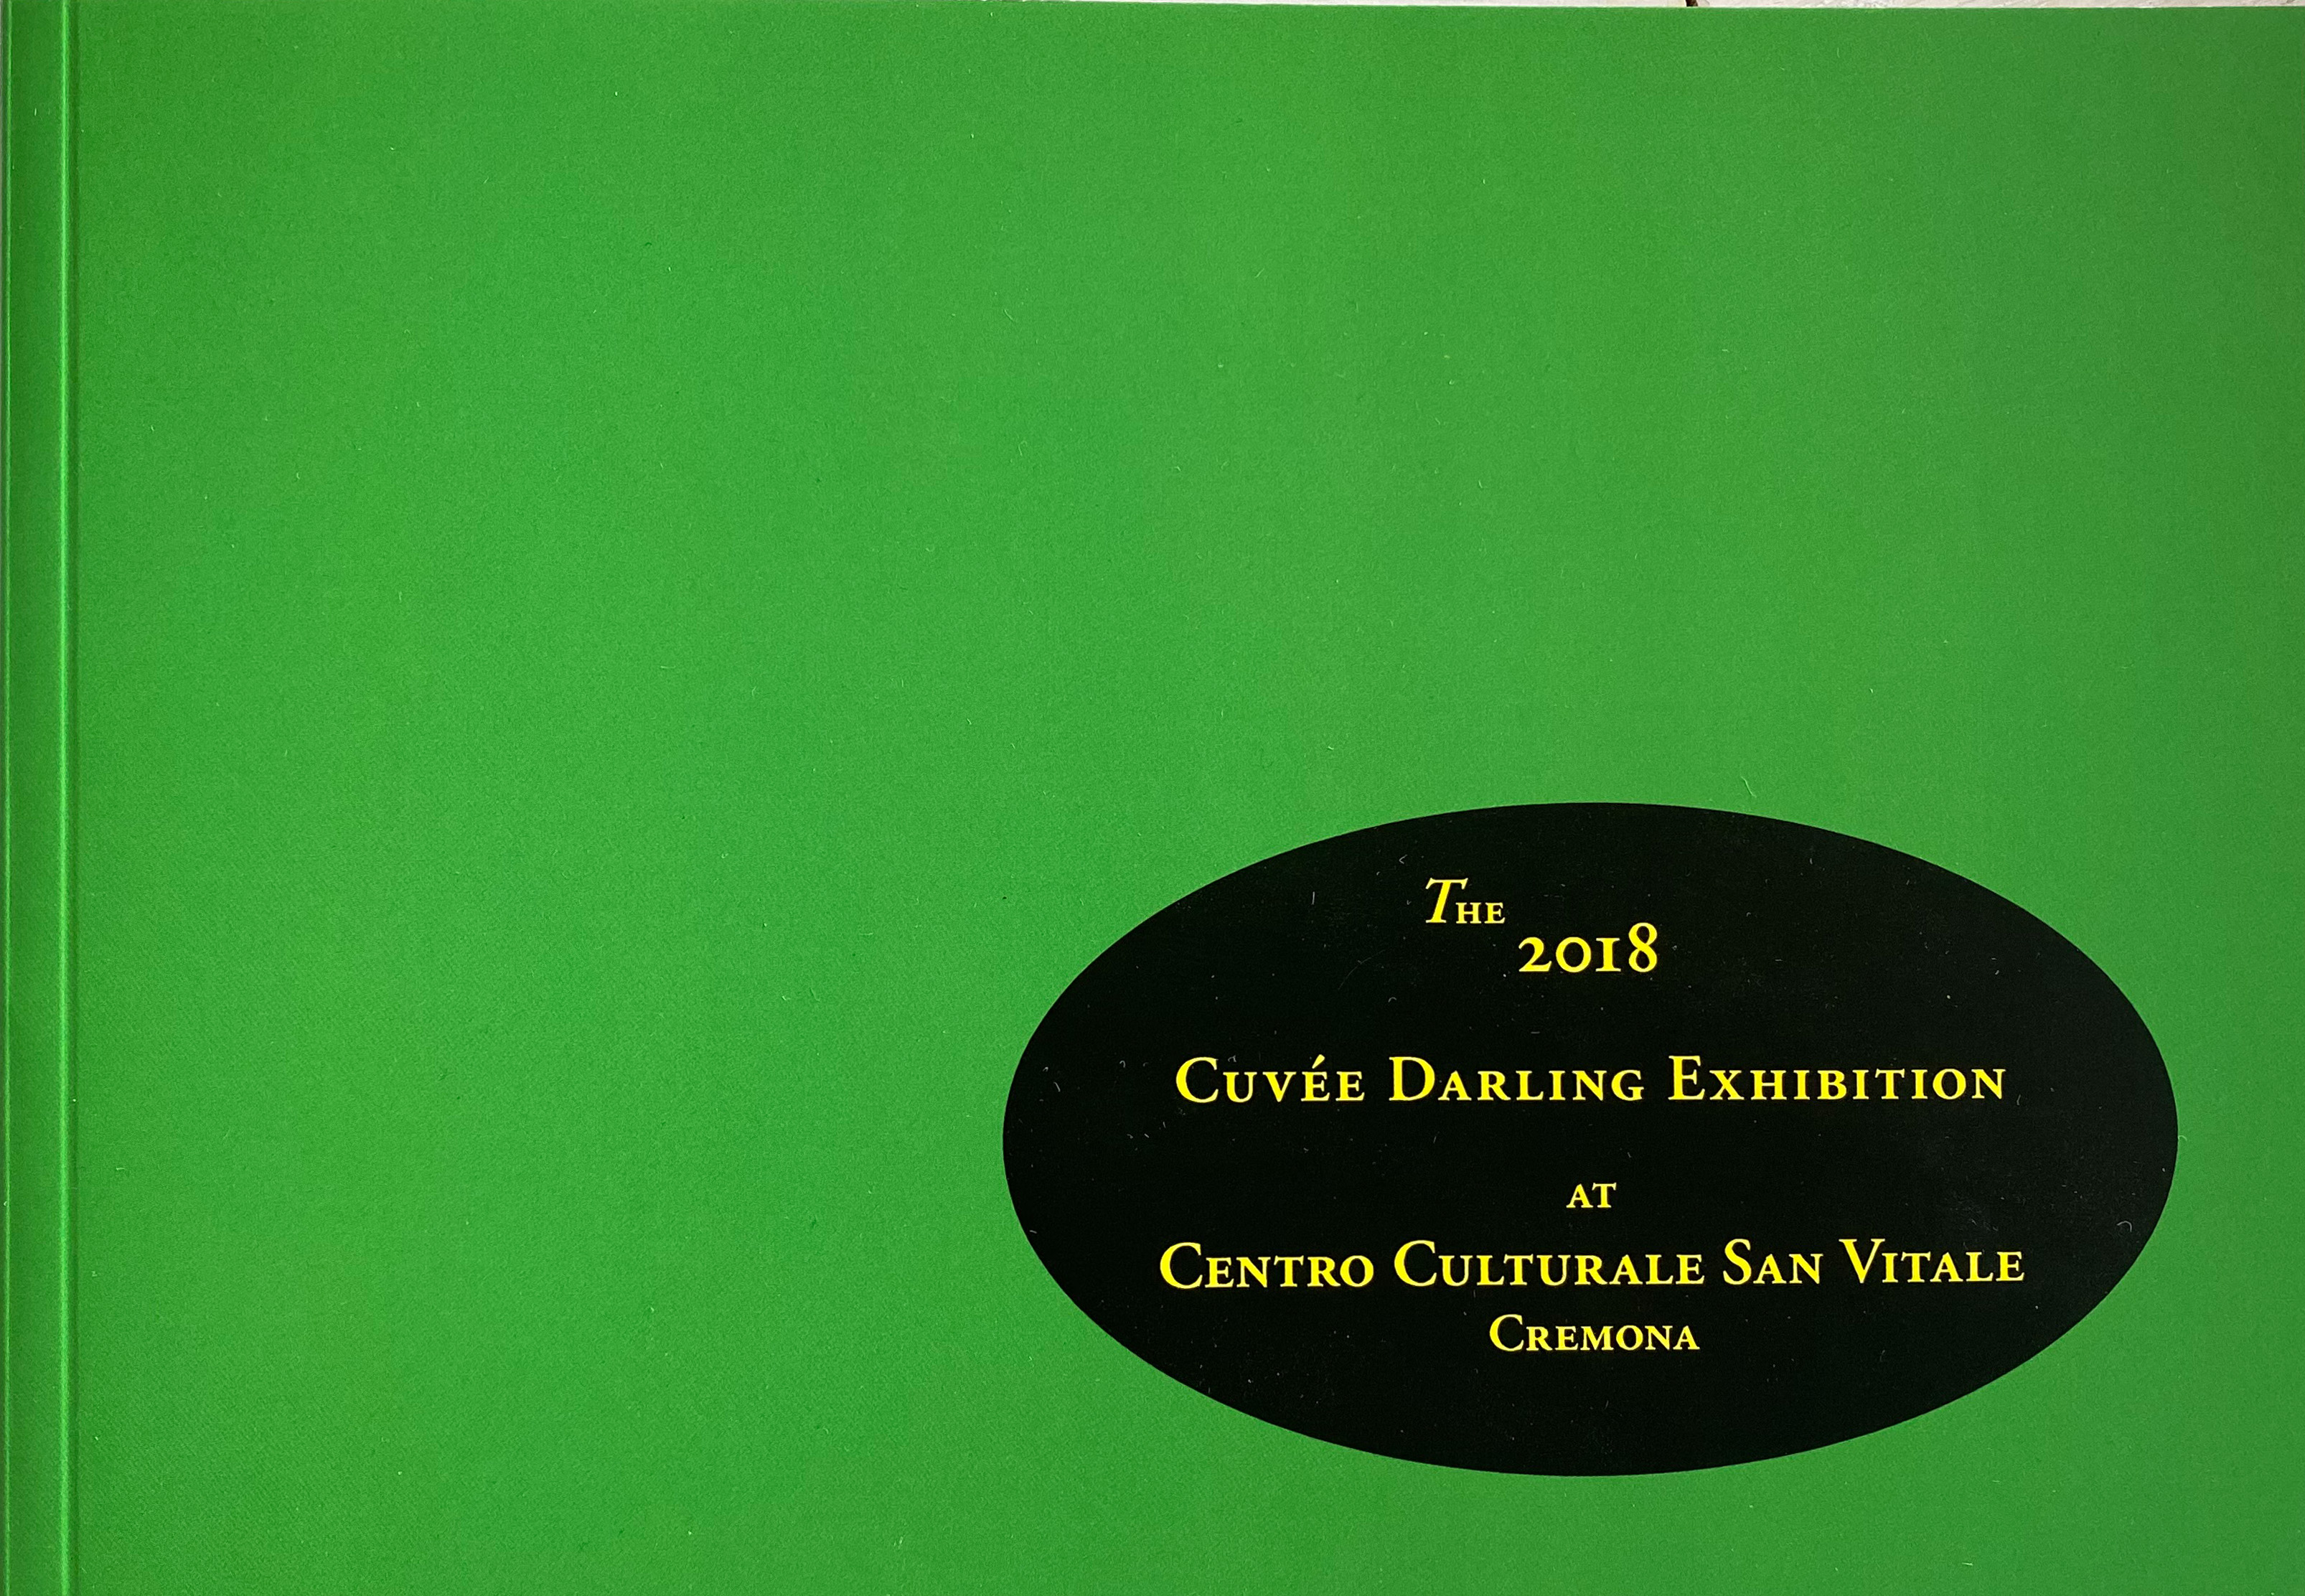 The 2018 Cuvee Darling Exhibition at Centro Culturale